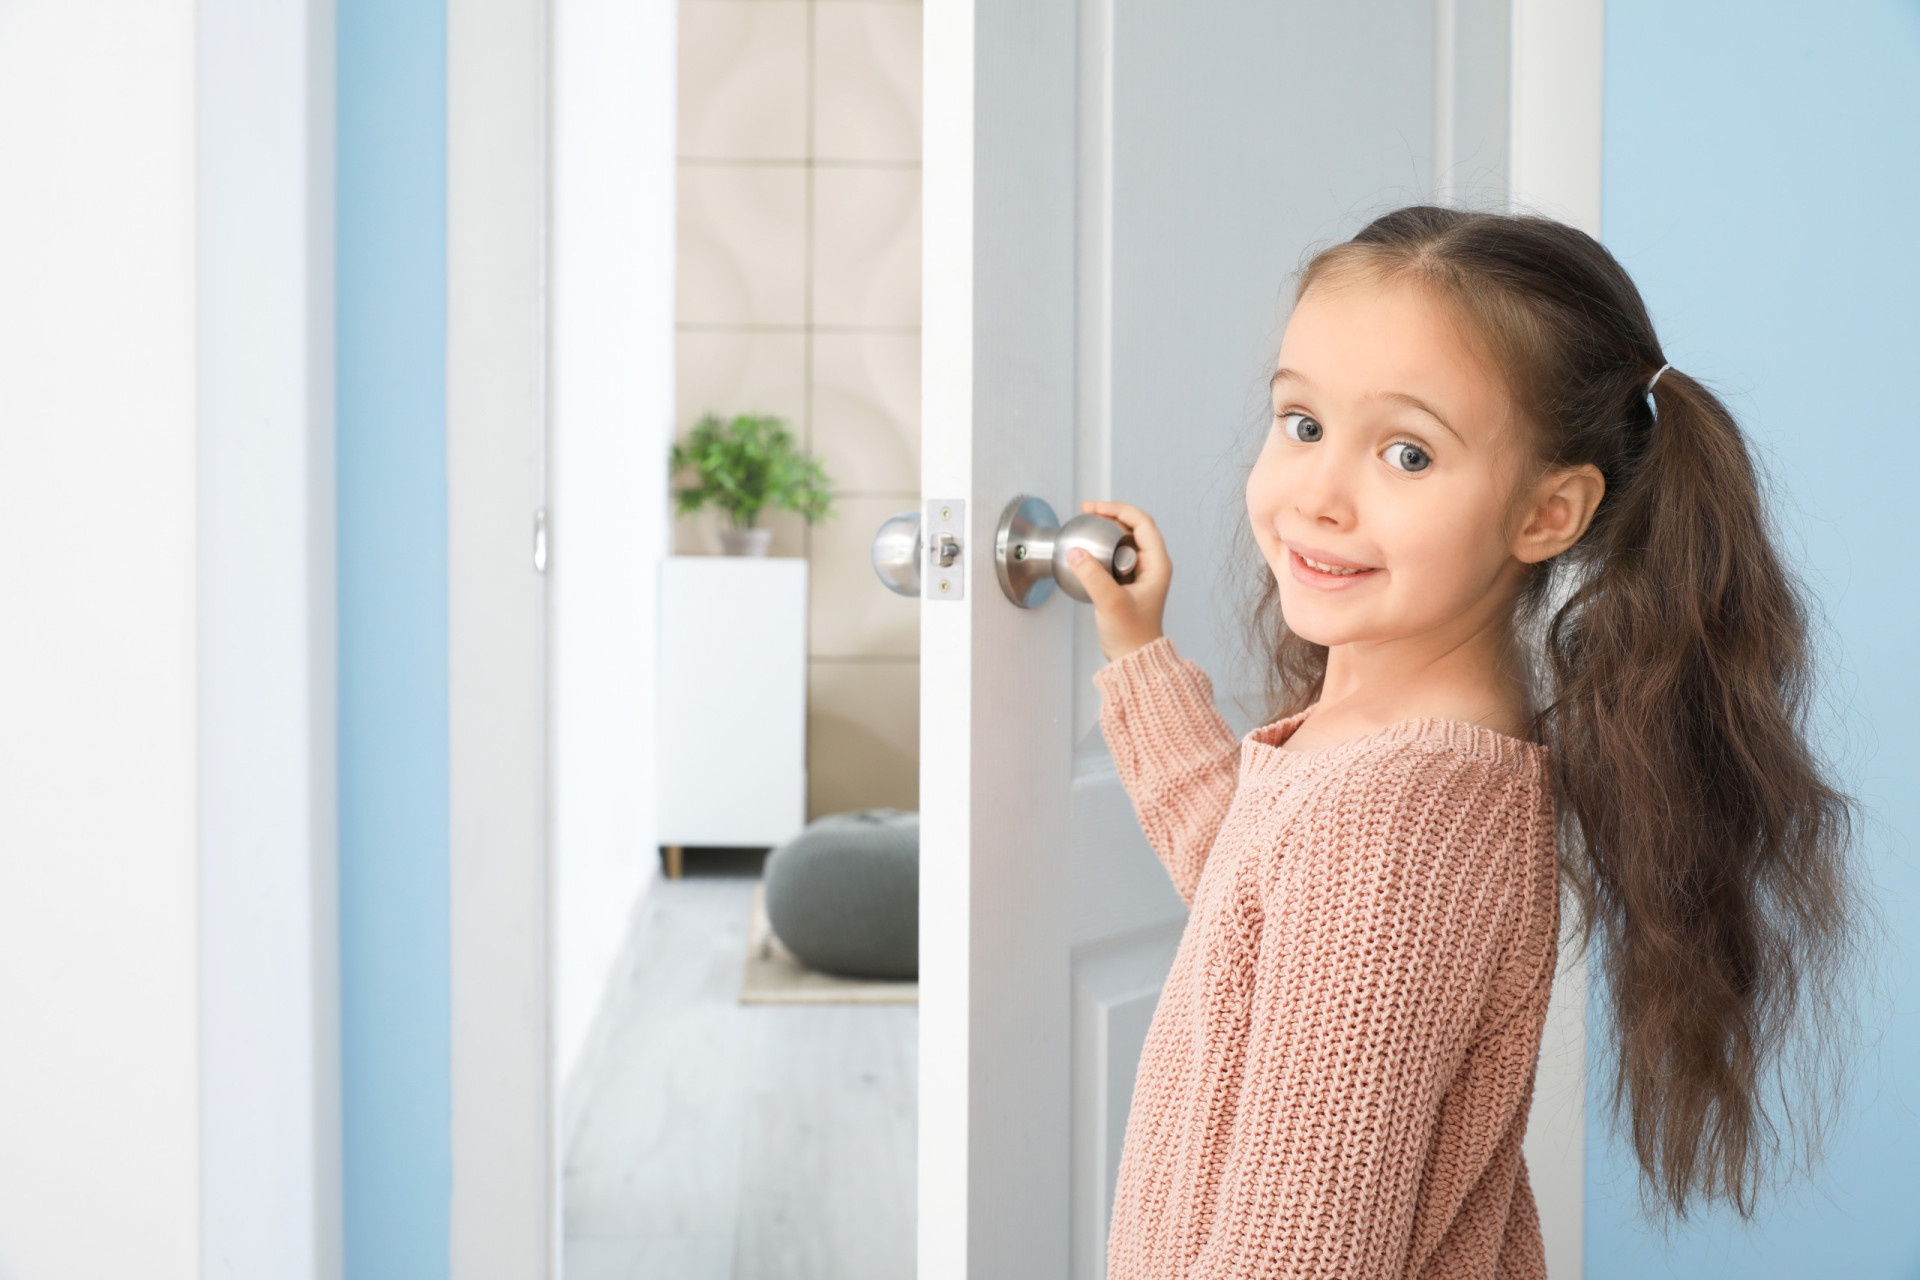 <p>Showing children the courtesy of holding doors open for others teaches them the value of politeness. It's a small gesture that makes a big difference in daily interactions.</p><p><a href="https://www.msn.com/en-us/community/channel/vid-7xx8mnucu55yw63we9va2gwr7uihbxwc68fxqp25x6tg4ftibpra?cvid=94631541bc0f4f89bfd59158d696ad7e">Follow us and access great exclusive content every day</a></p>